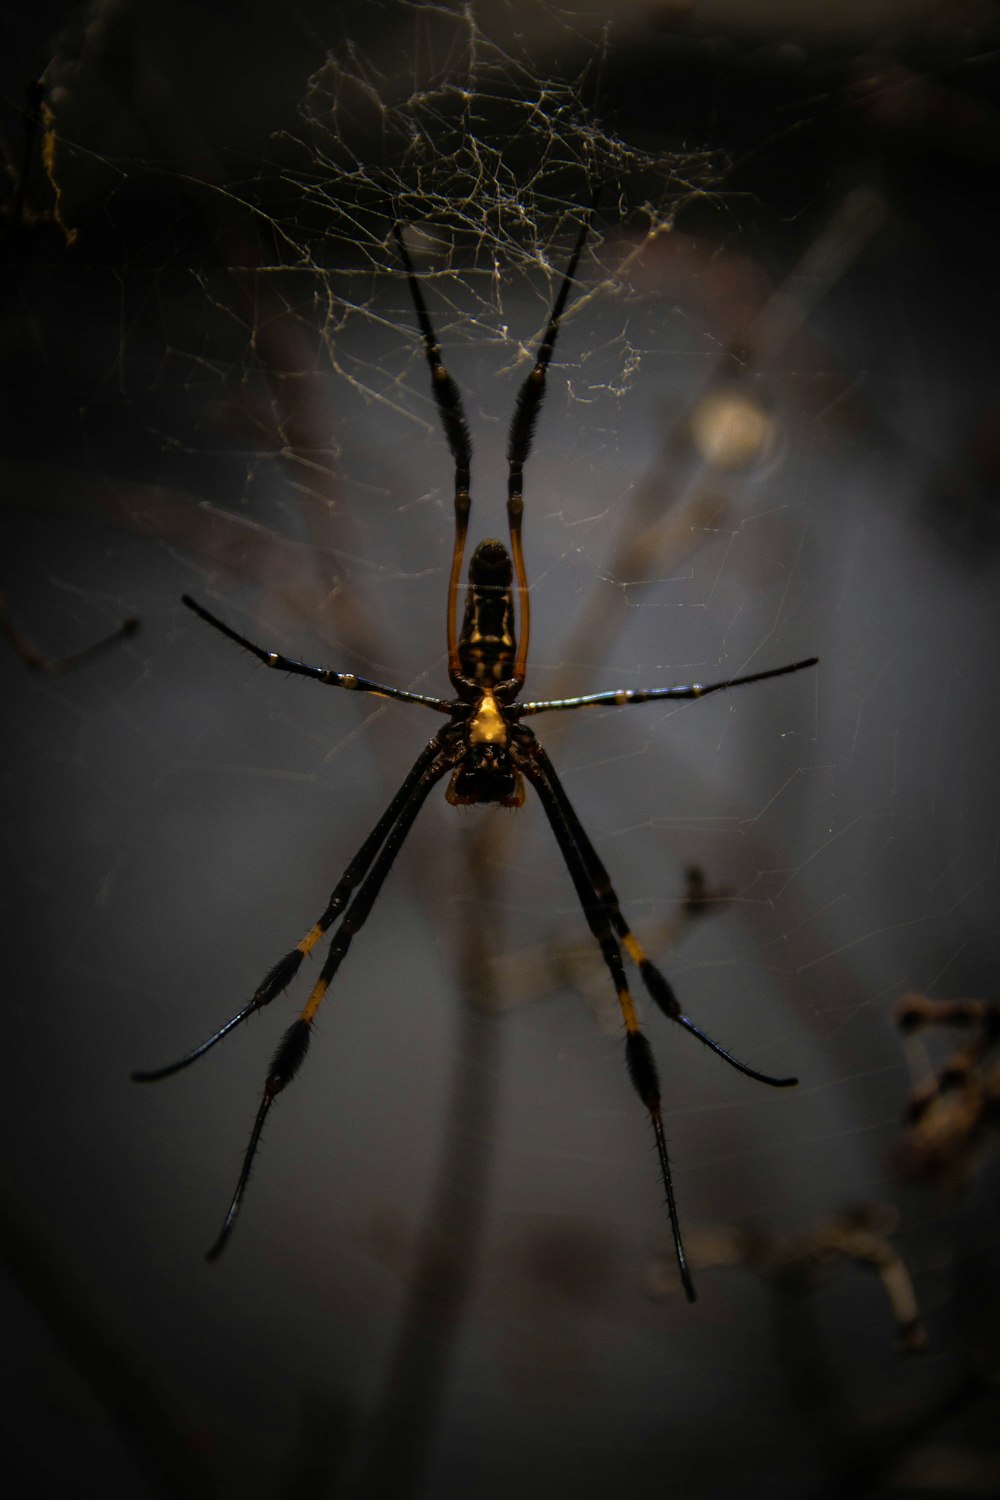 black and brown spider